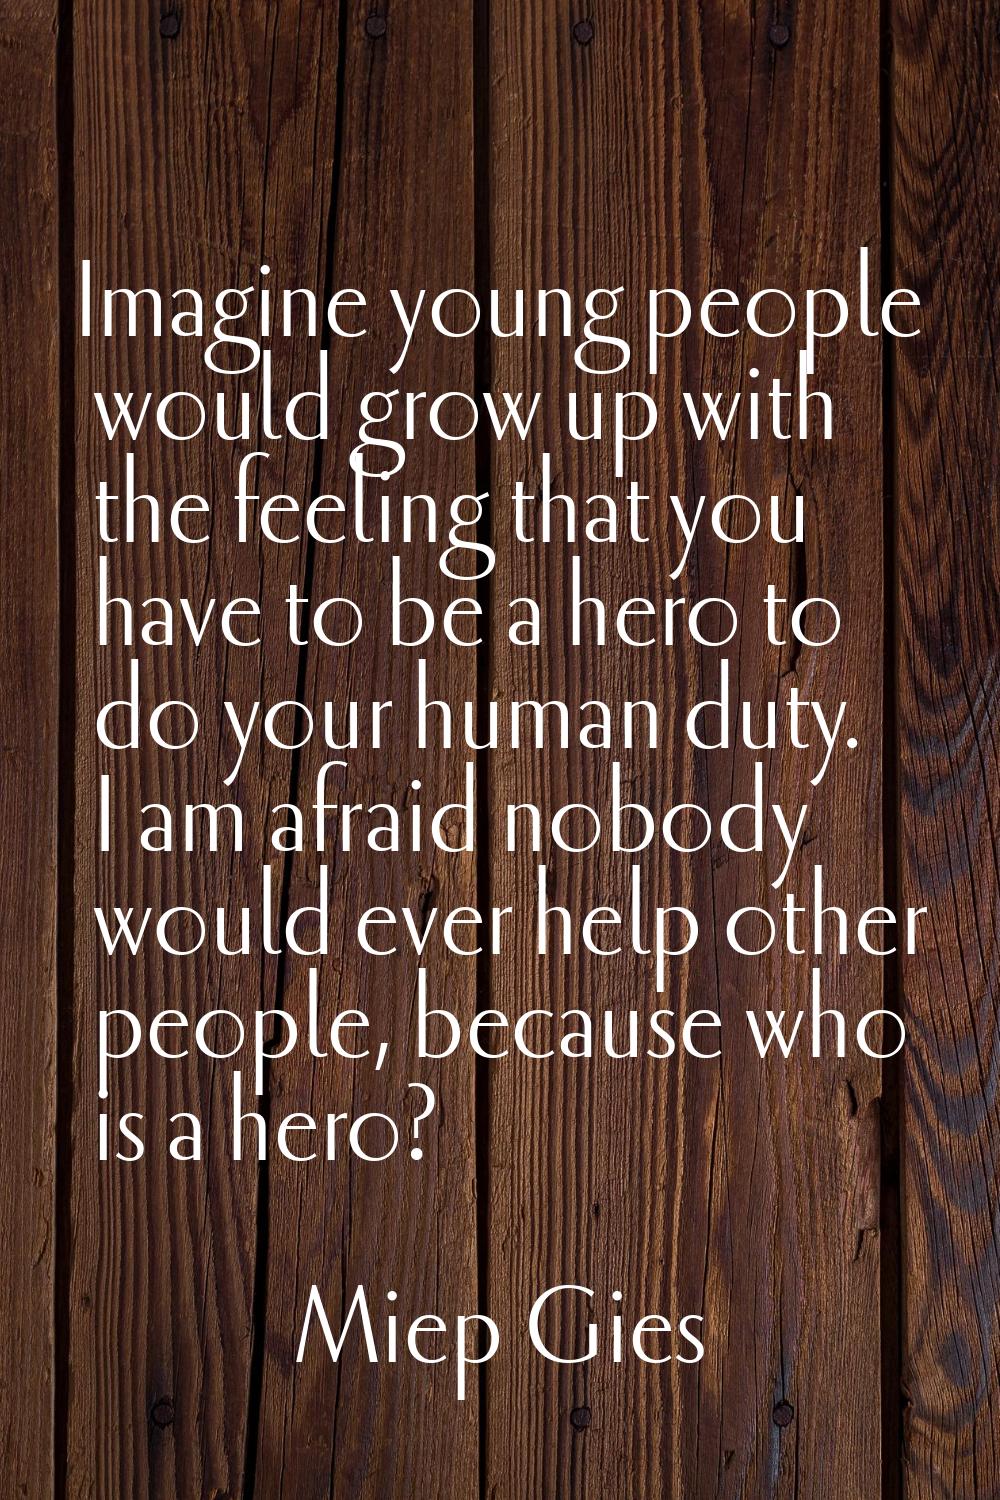 Imagine young people would grow up with the feeling that you have to be a hero to do your human dut